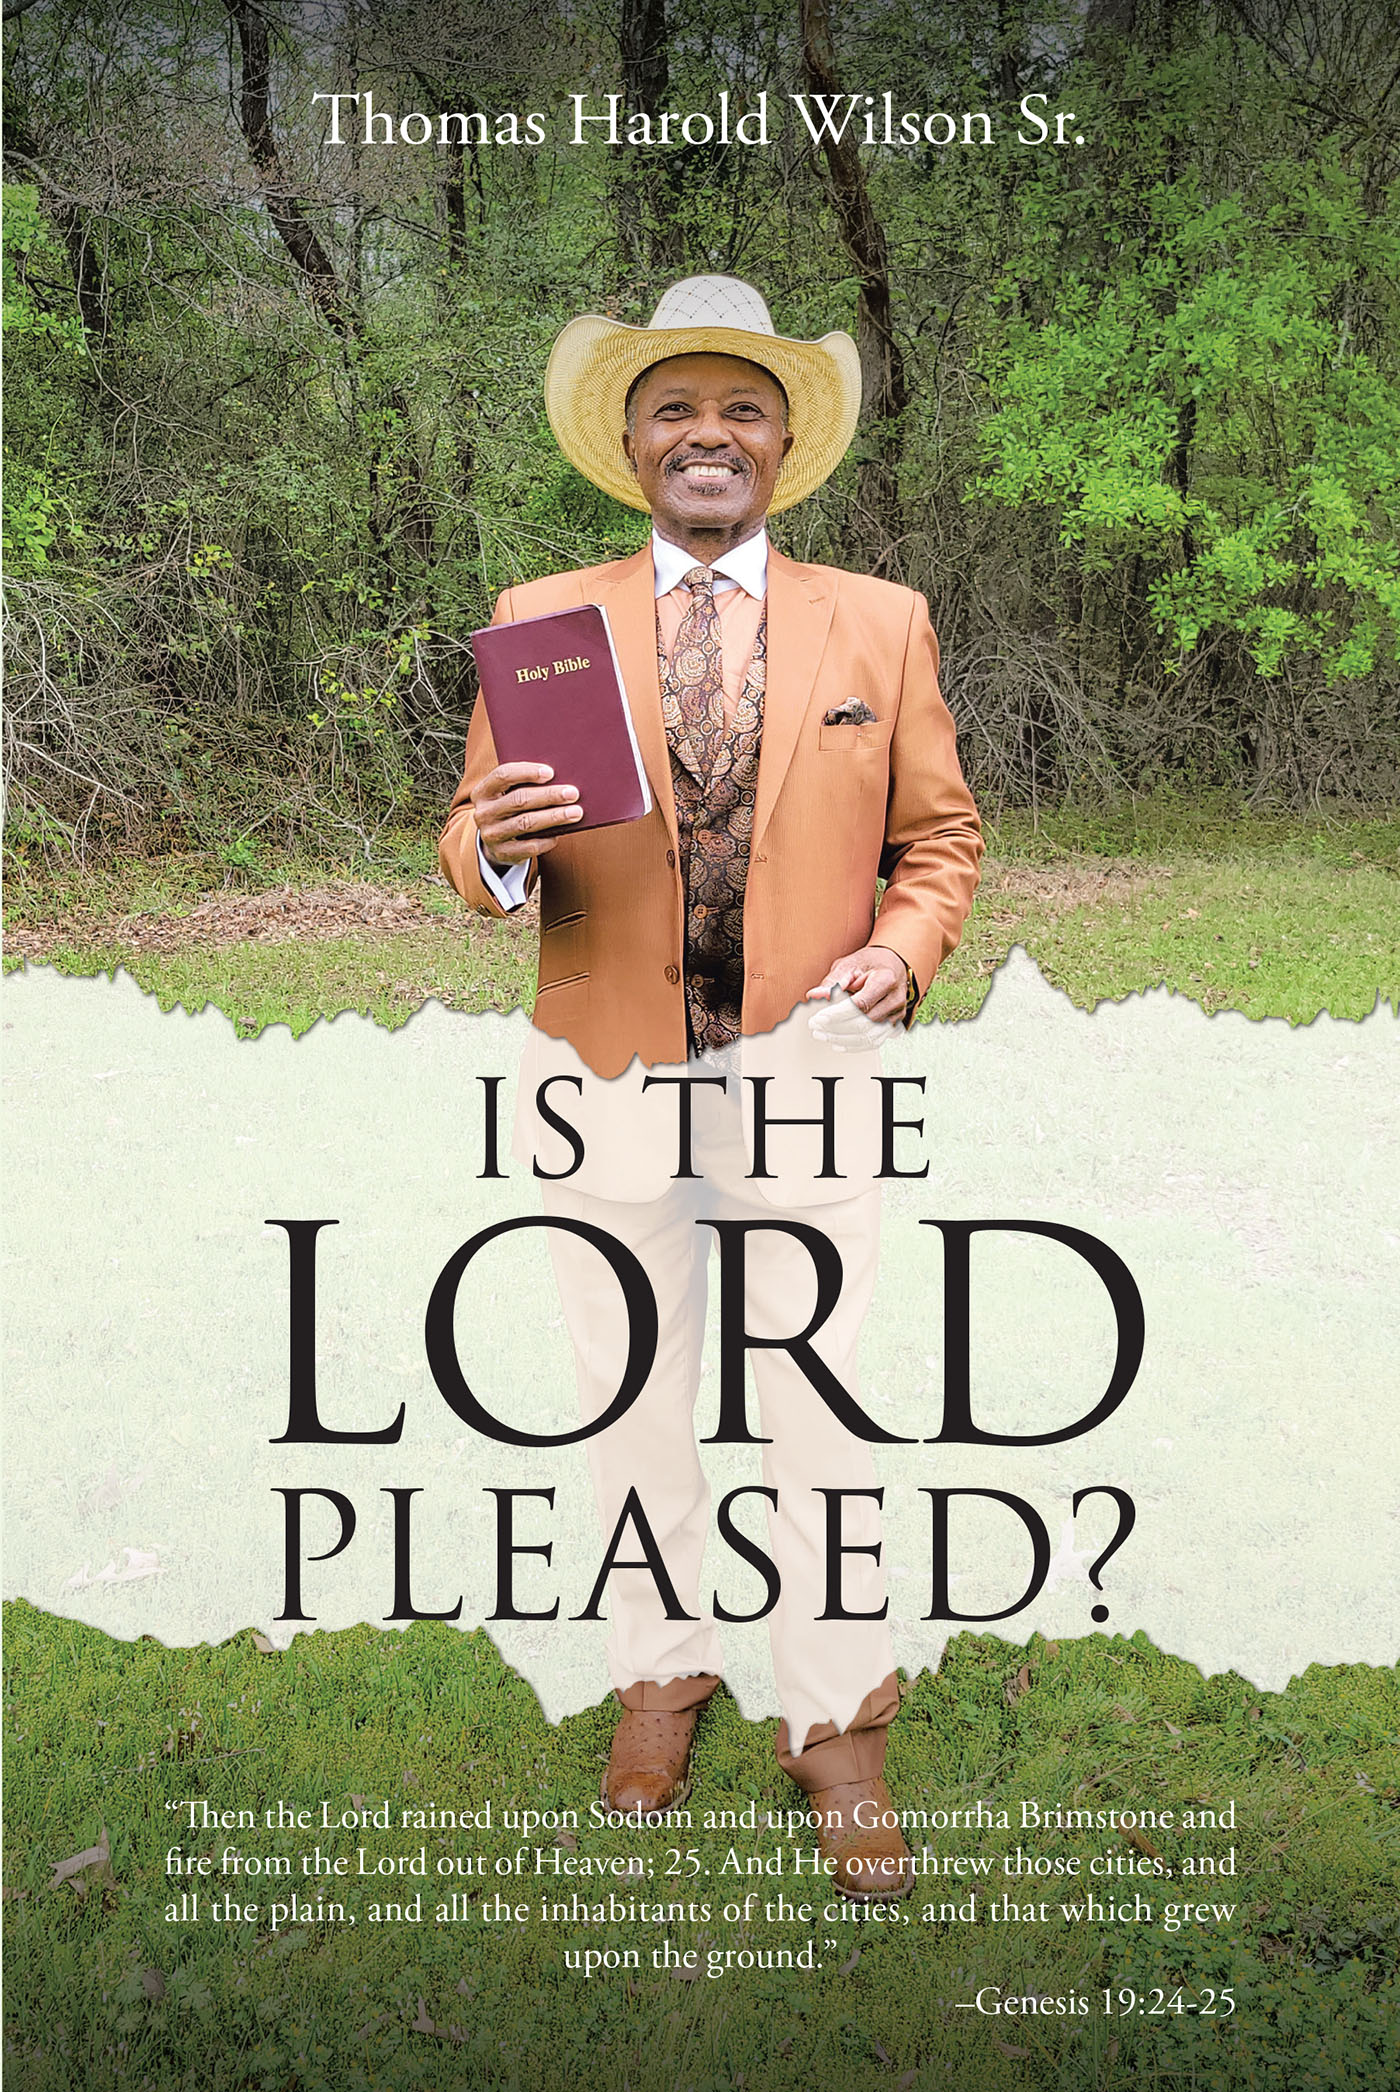 Thomas Harold Wilson Sr’s Newly Released “Is the Lord Pleased?” is a Heartfelt Call for Readers to Evaluate Their Spiritual Well-Being